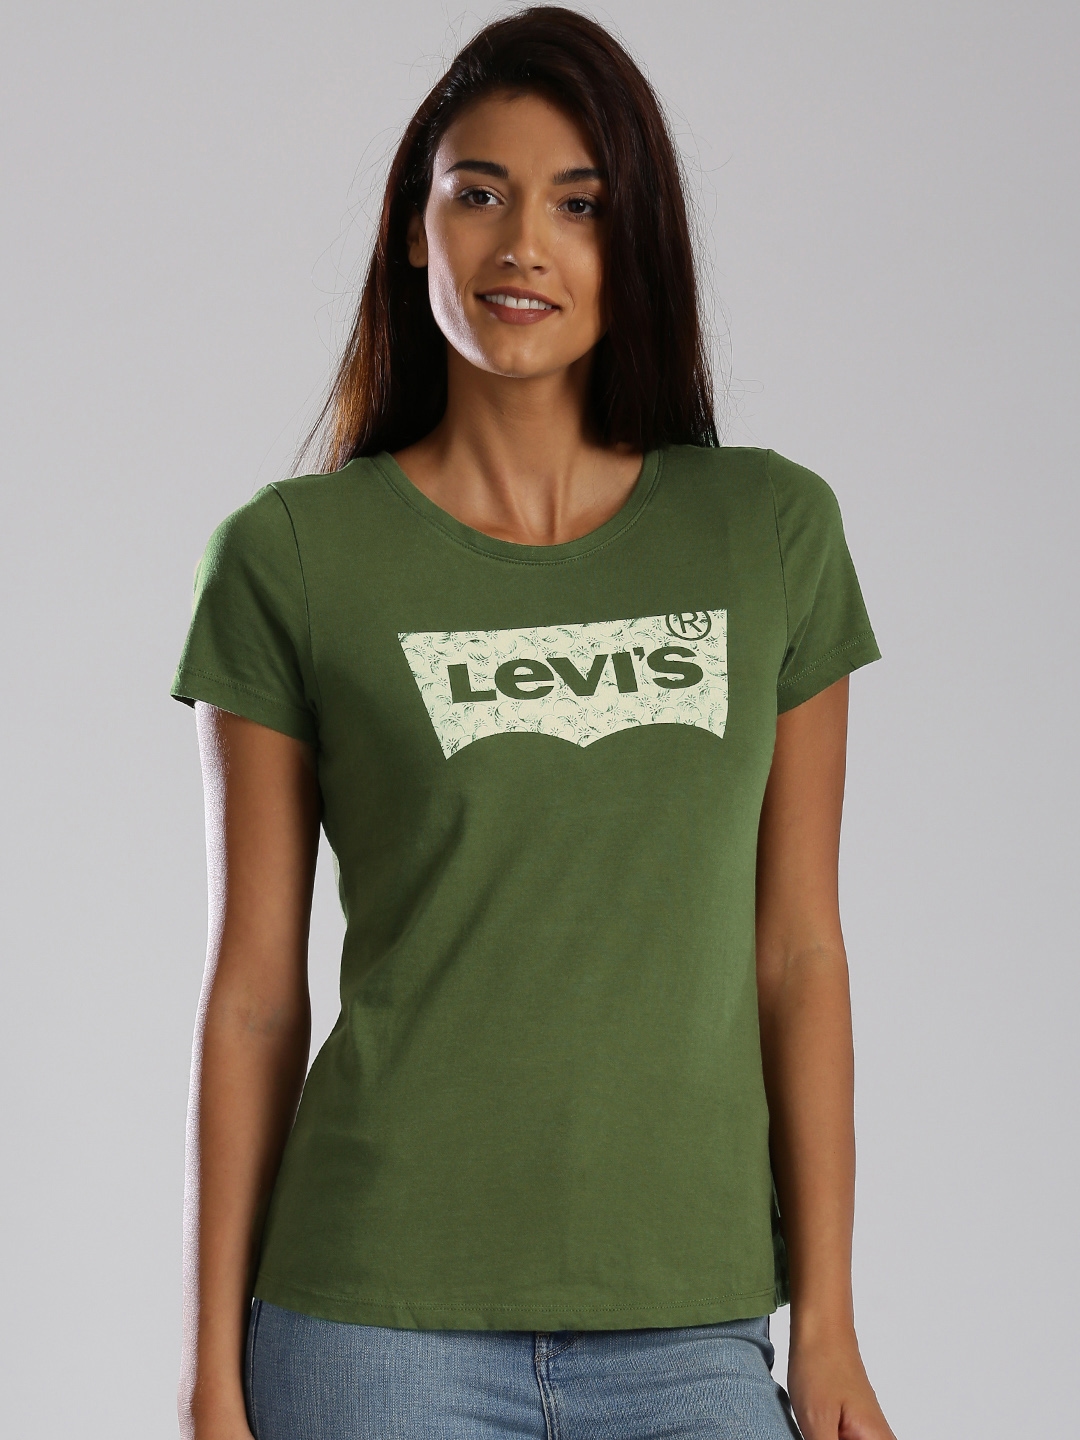 Buy Levis Olive Green Printed Pure Cotton T Shirt - Tshirts for Women  1428532 | Myntra